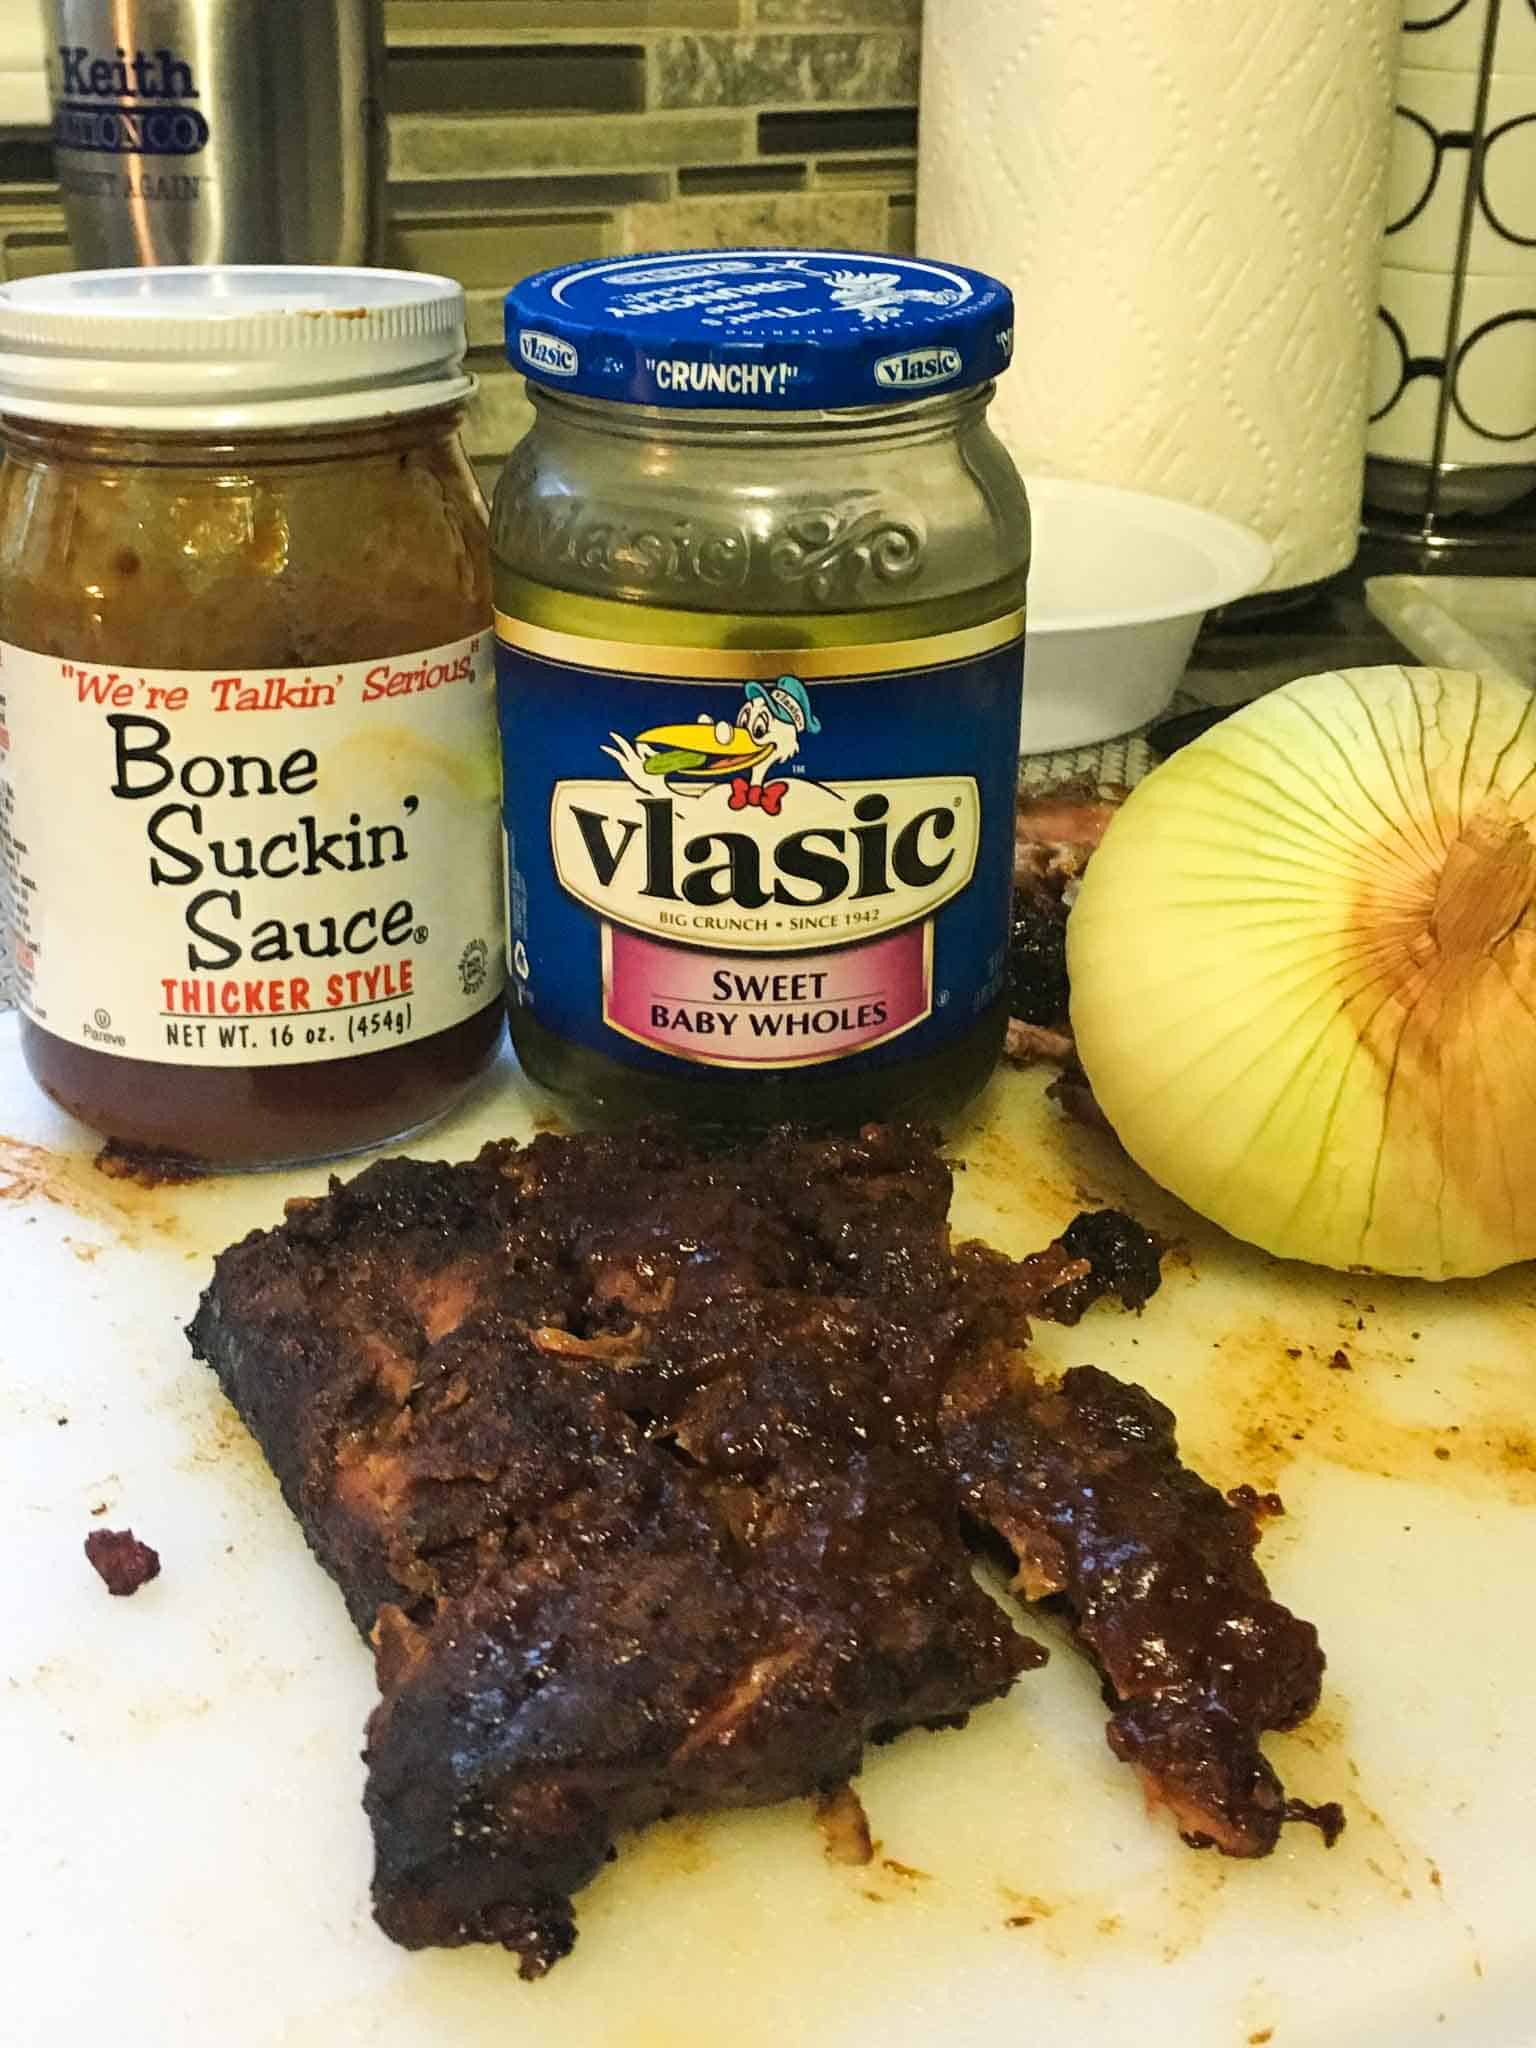 ribs sitting in front of BBQ sauce pickles and onion close up view